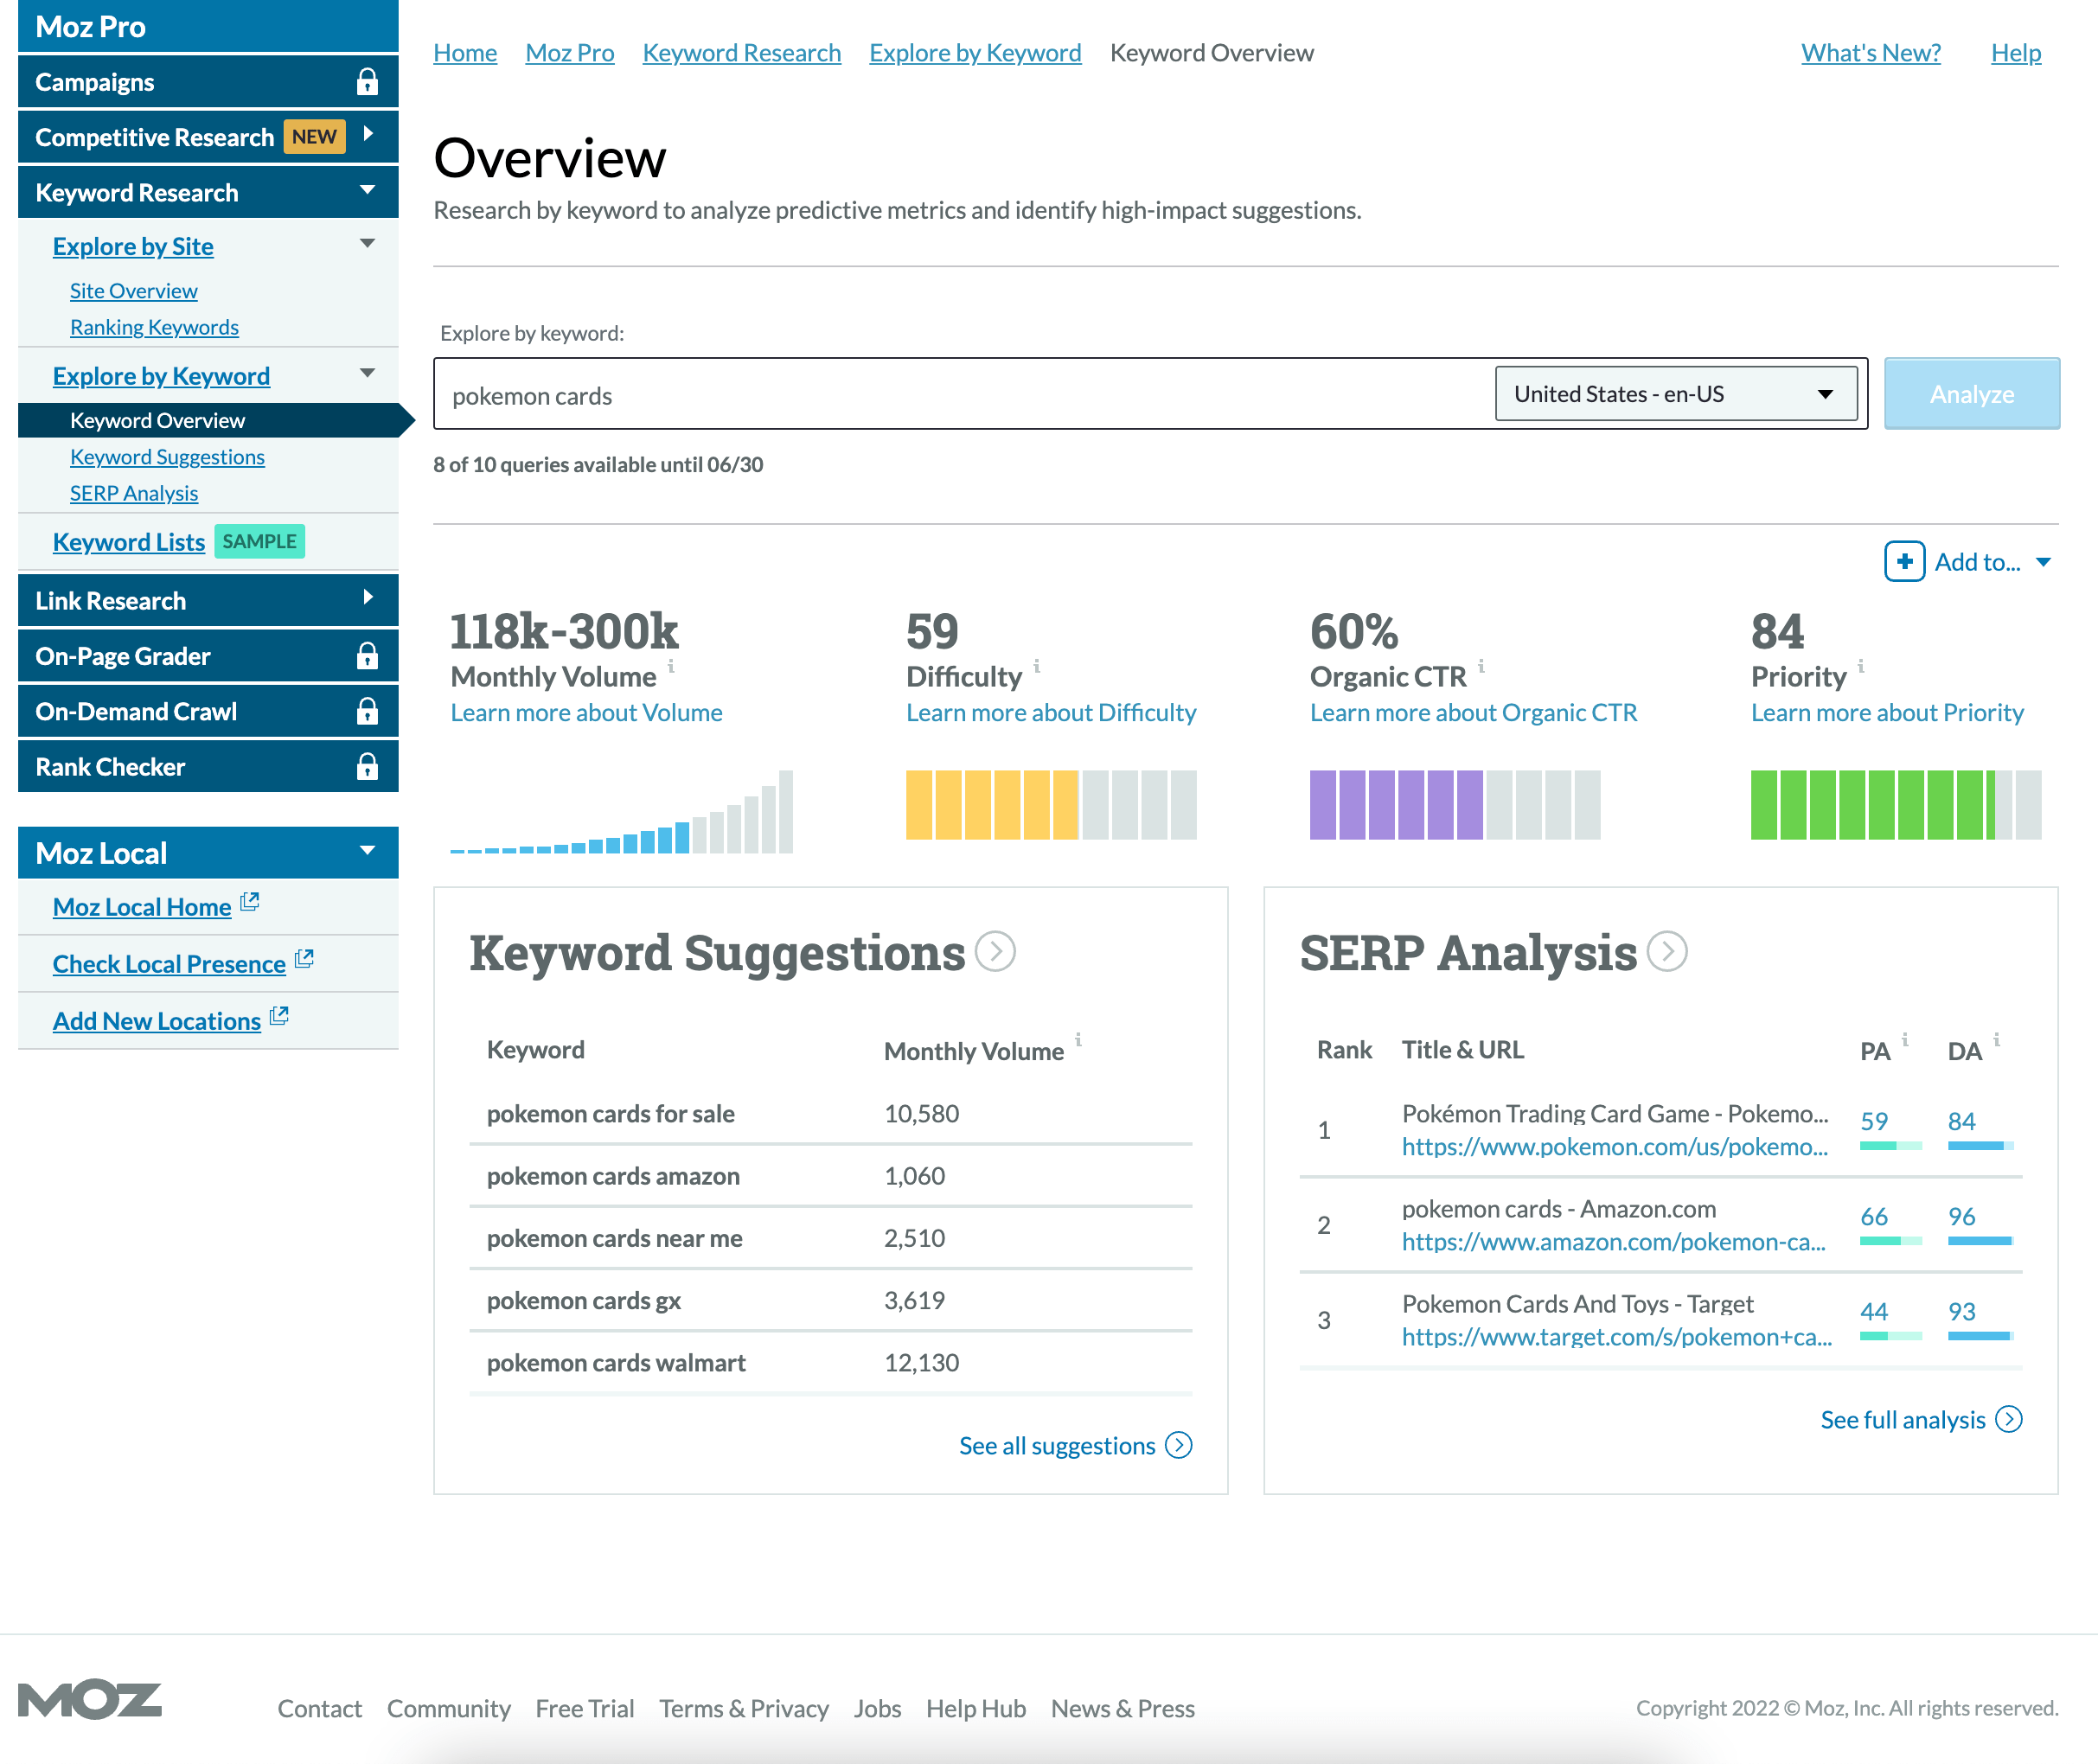 Moz dashboard overview for 'pokemon cards' keyword showing search volume, difficulty, and organic CTR.